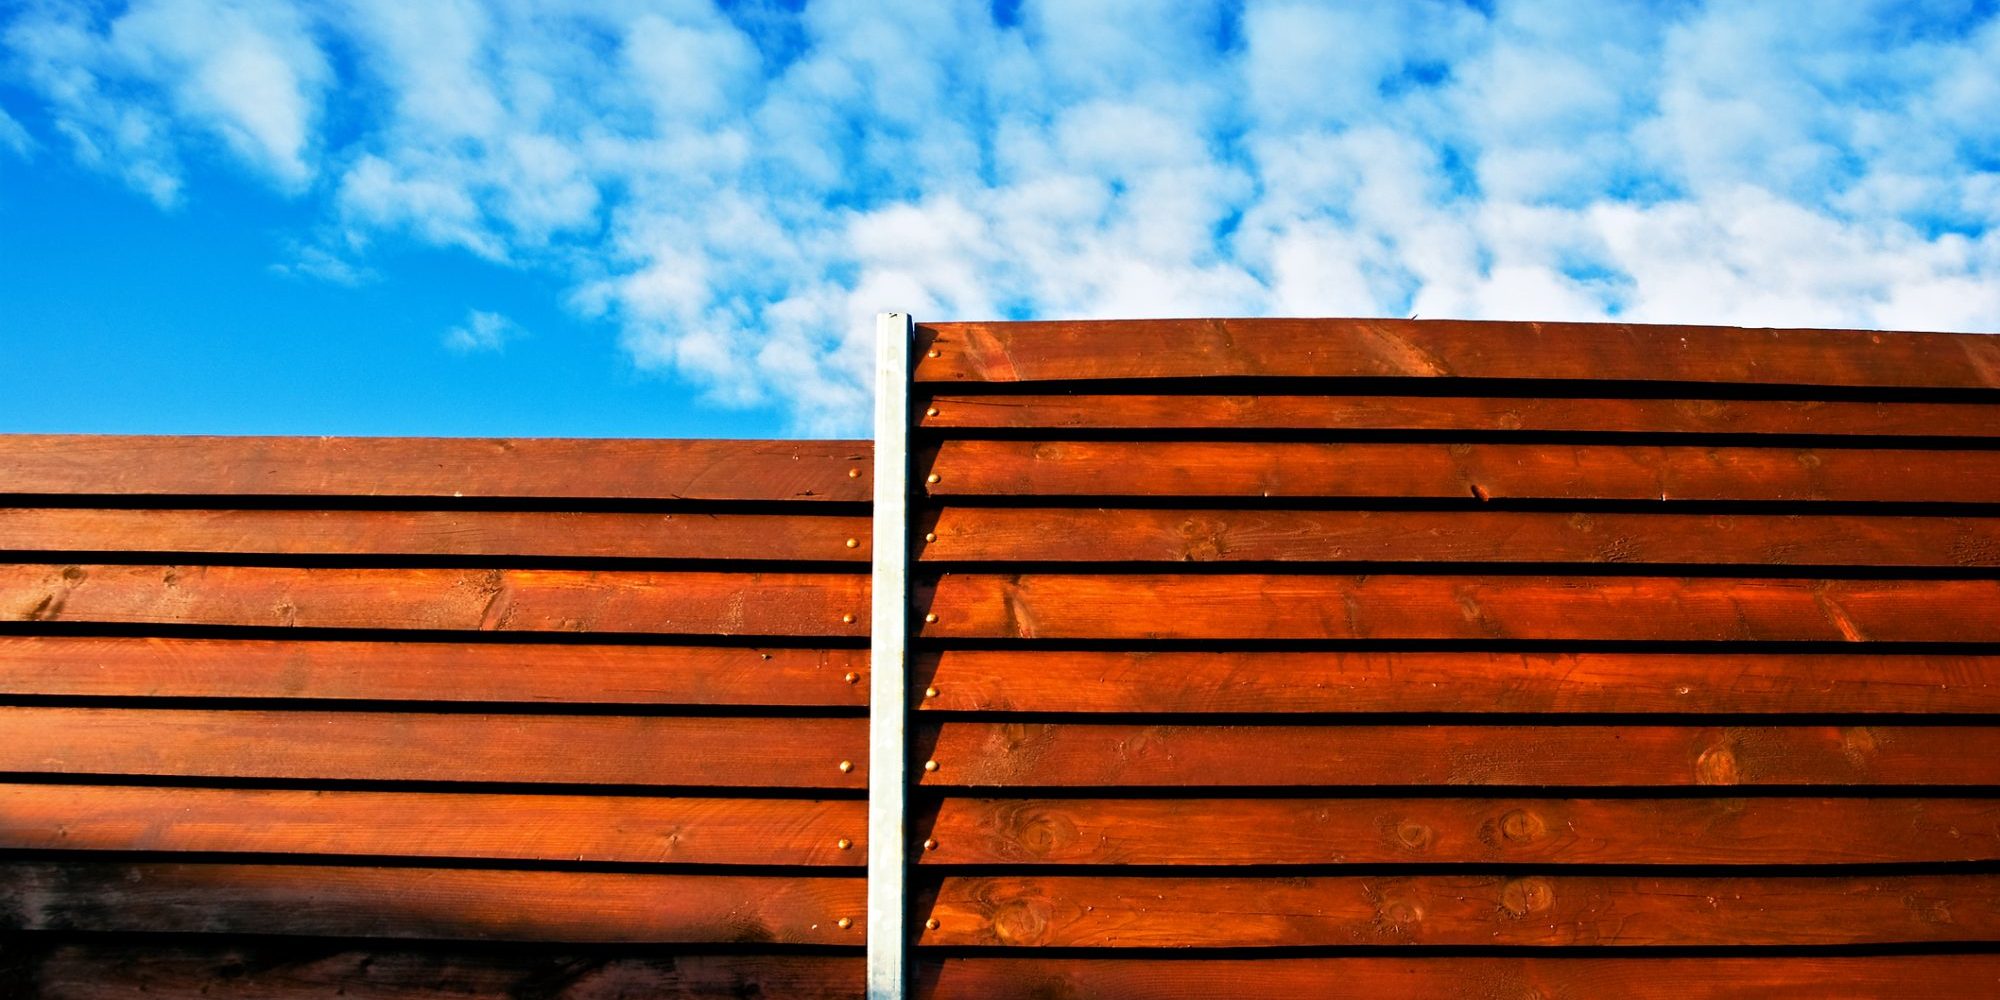 Wooden fence or boarding with cloudy blue sky in background - modern design. Wood construction.